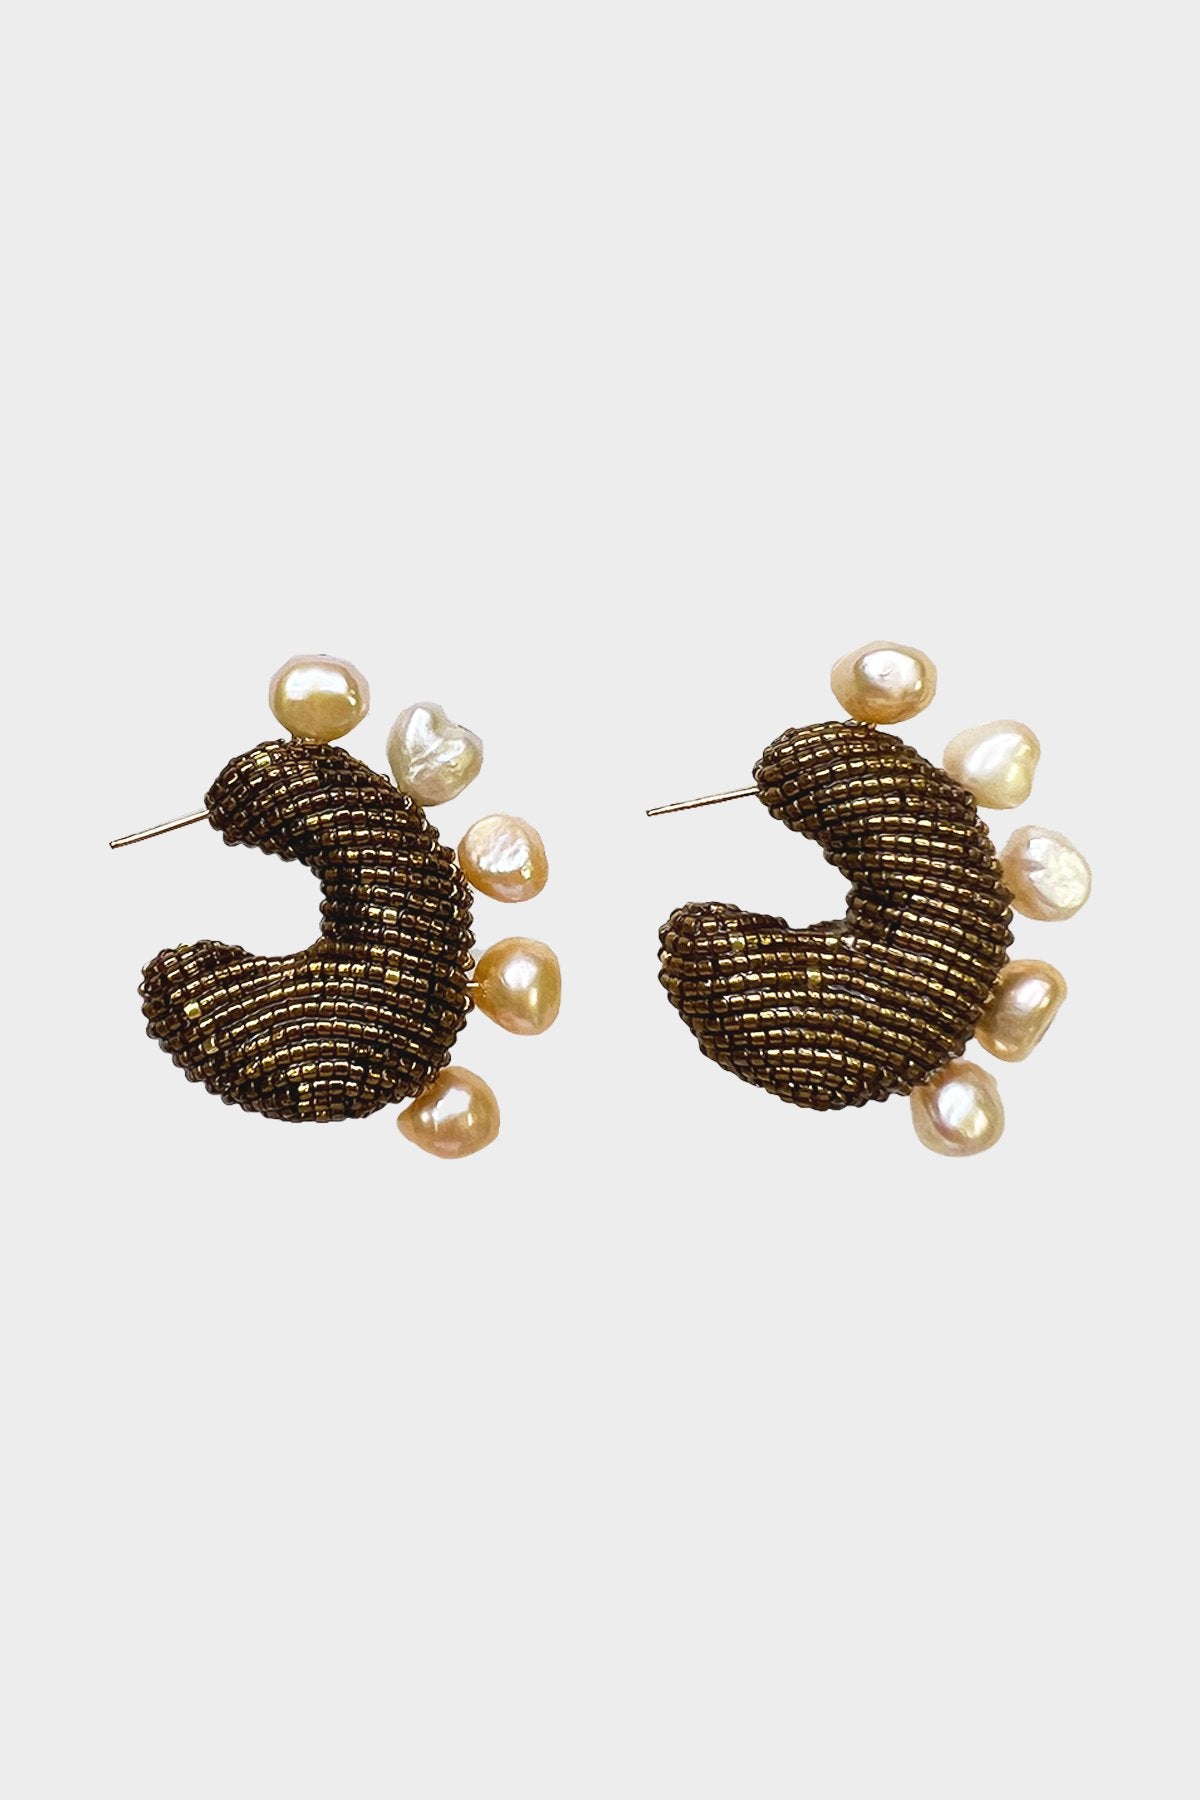 Solito Pearled Earrings in Bronze - shop-olivia.com